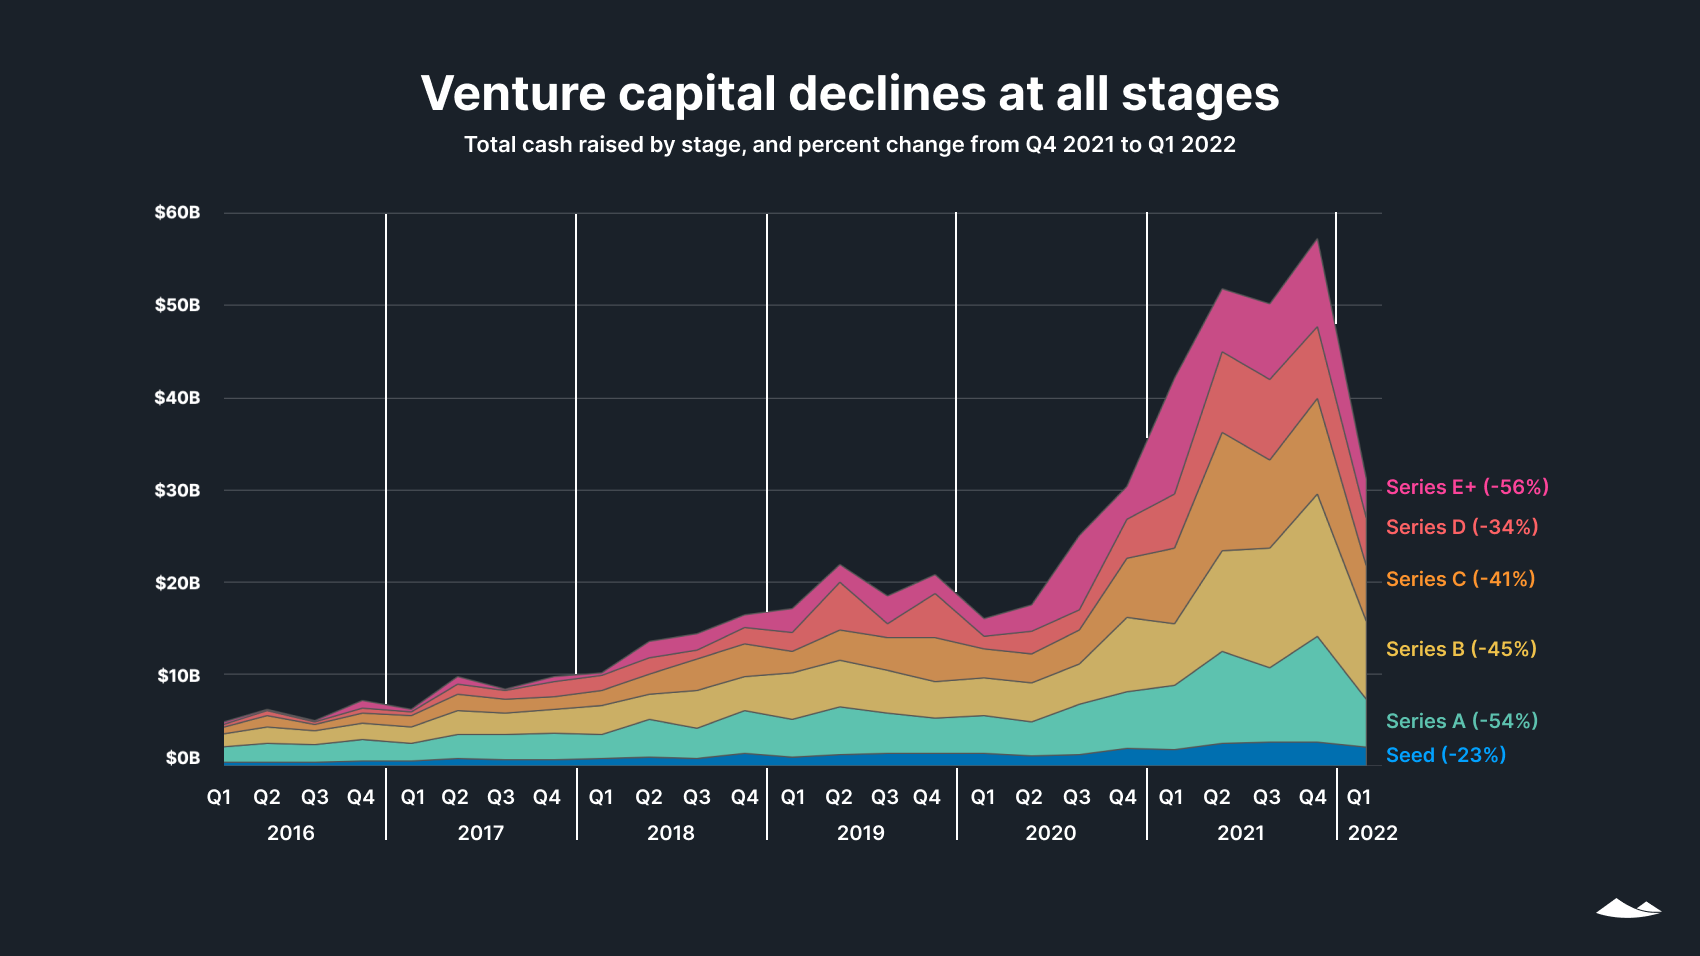 Venture capital declines at all stages